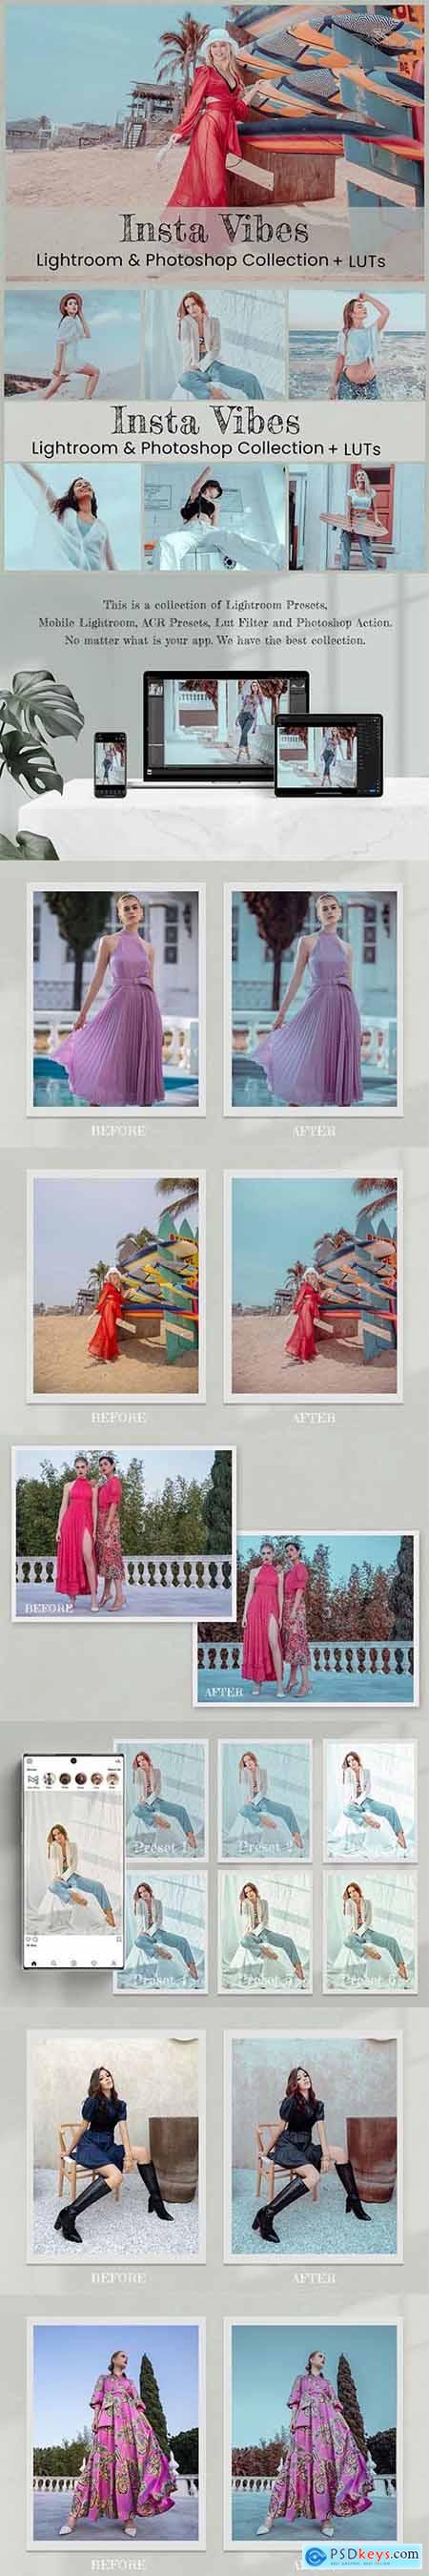 Insta Vibes Photoshop Actions LUTs 7010312